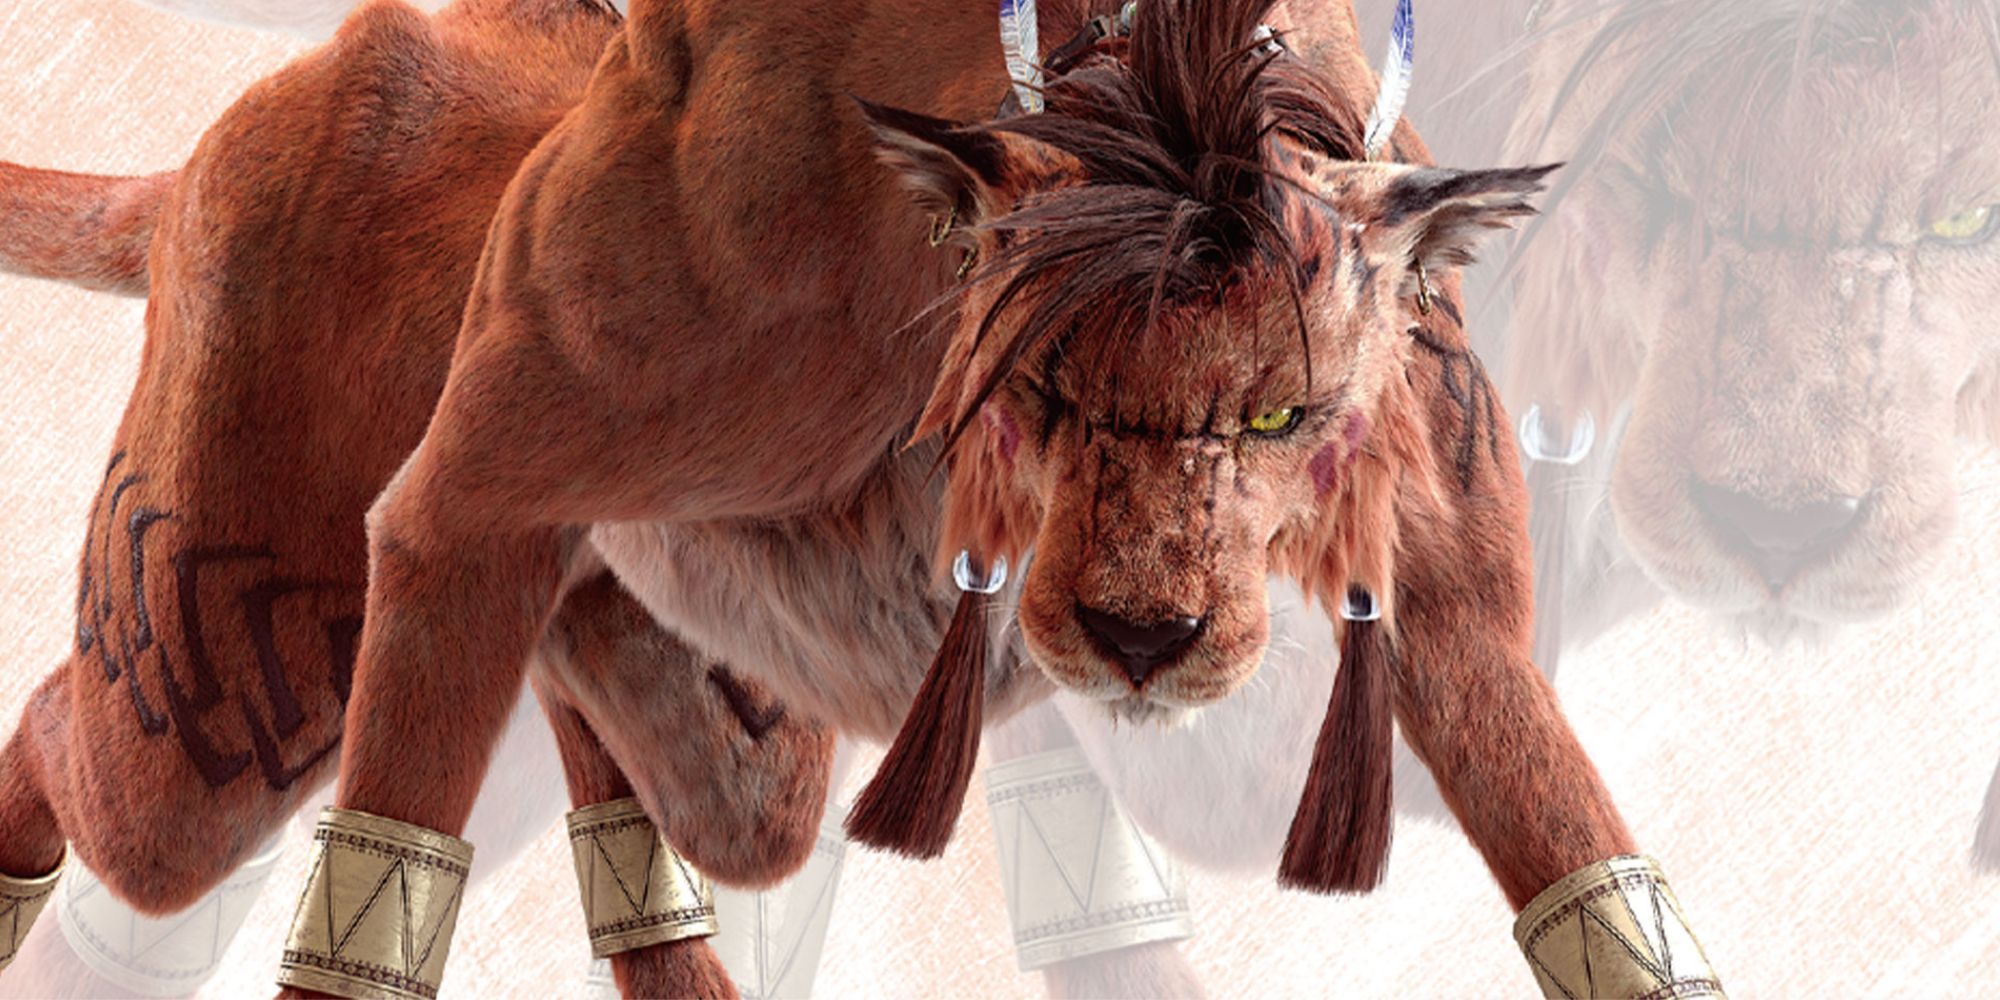 Red XIII Glaring at the camera wearing gold bracelets and feather headdress on head.